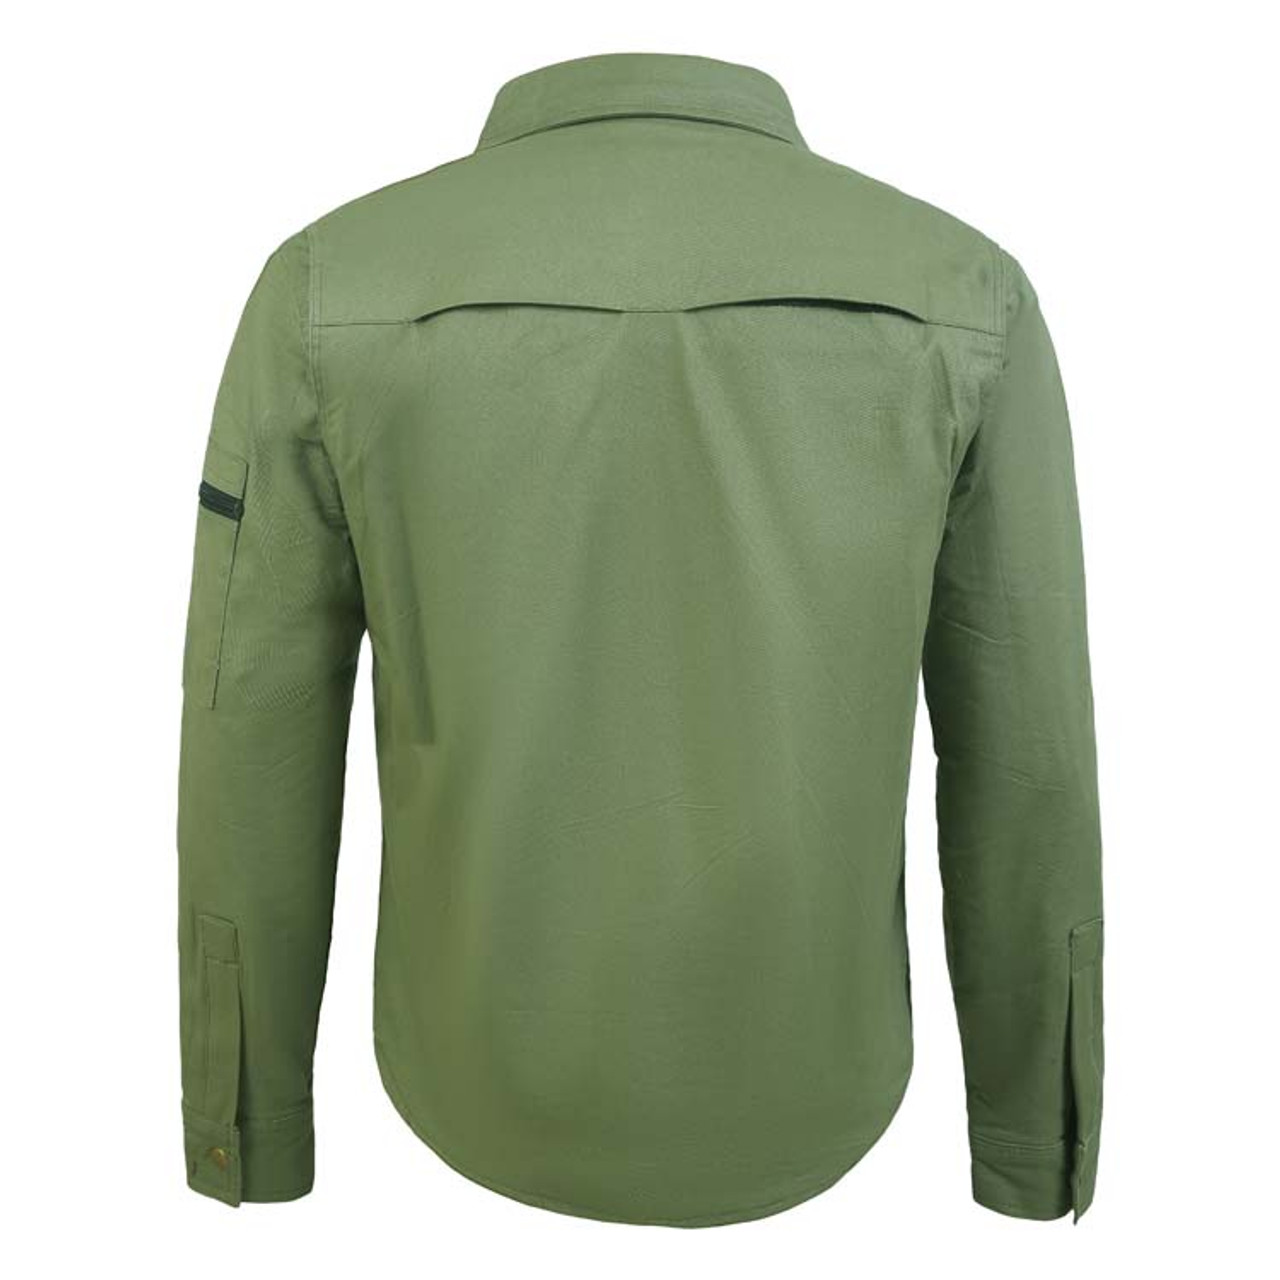 Vanguard Moto Shirt Protective Lining and CE armour included - khaki